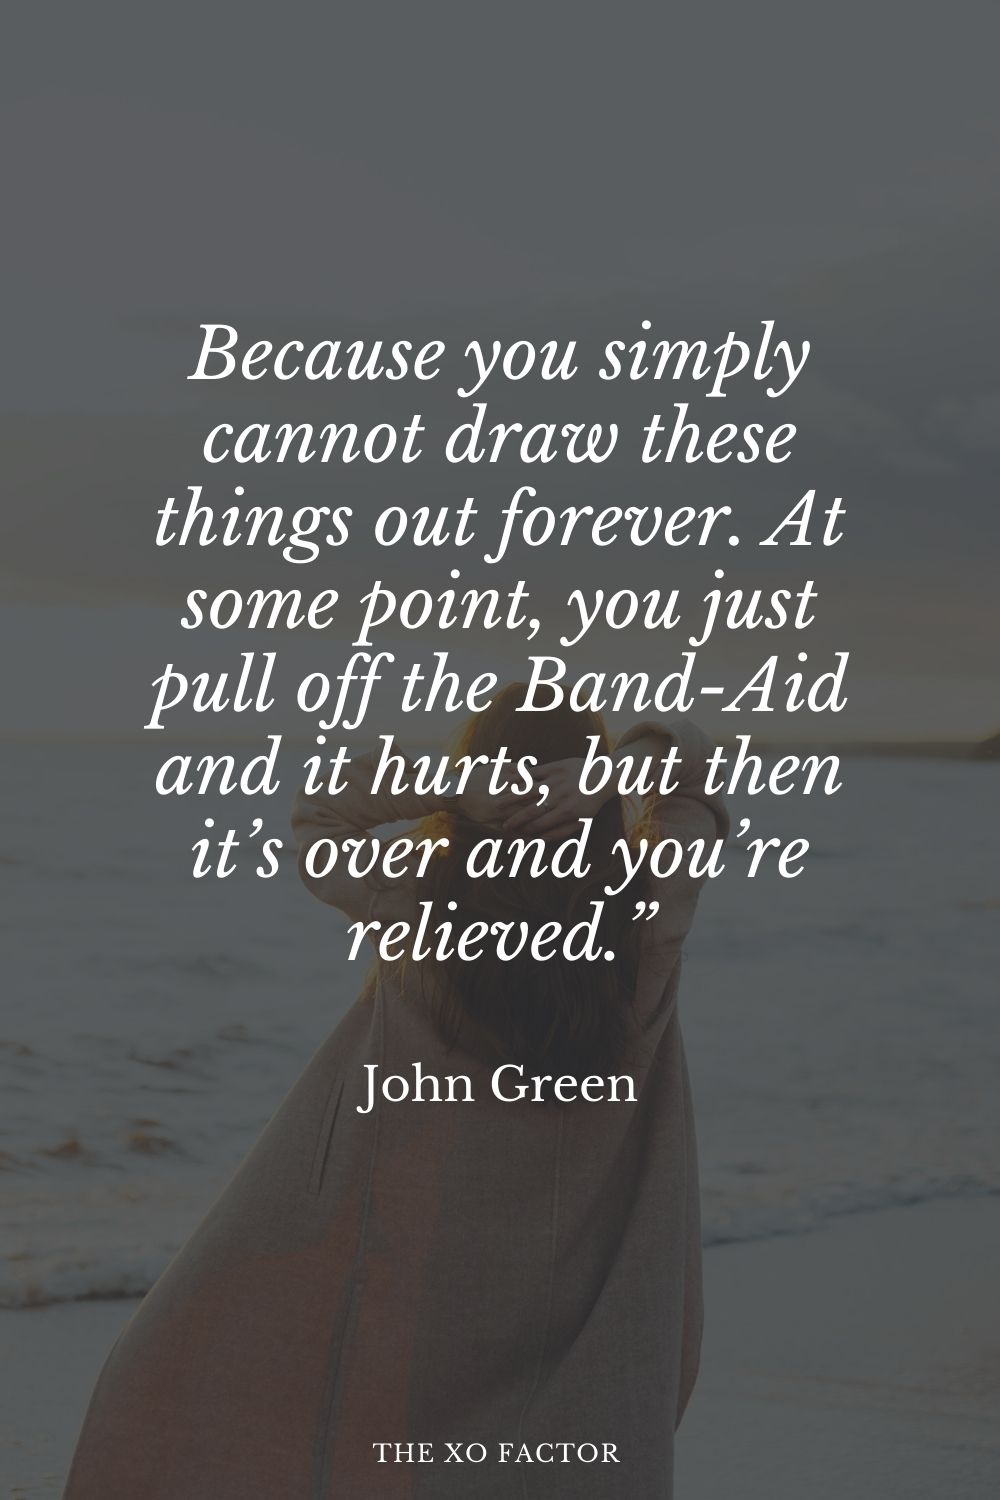 Because you simply cannot draw these things out forever. At some point, you just pull off the Band-Aid and it hurts, but then it’s over and you’re relieved.” John Green